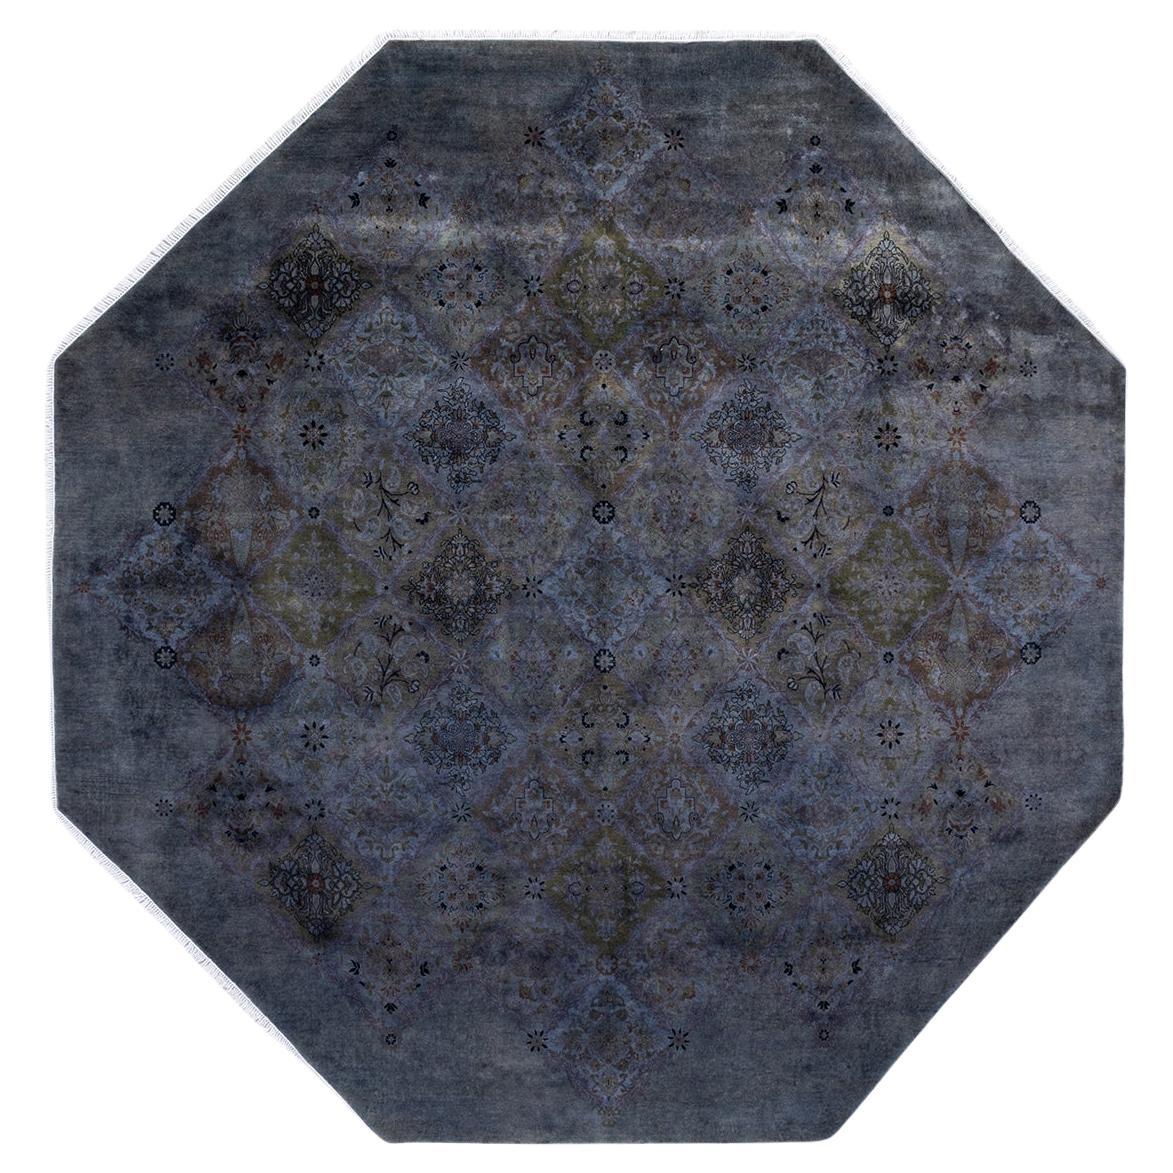 One of a Kind Hand Knotted Contemporary Overdyed Gray Octagon Area Rug